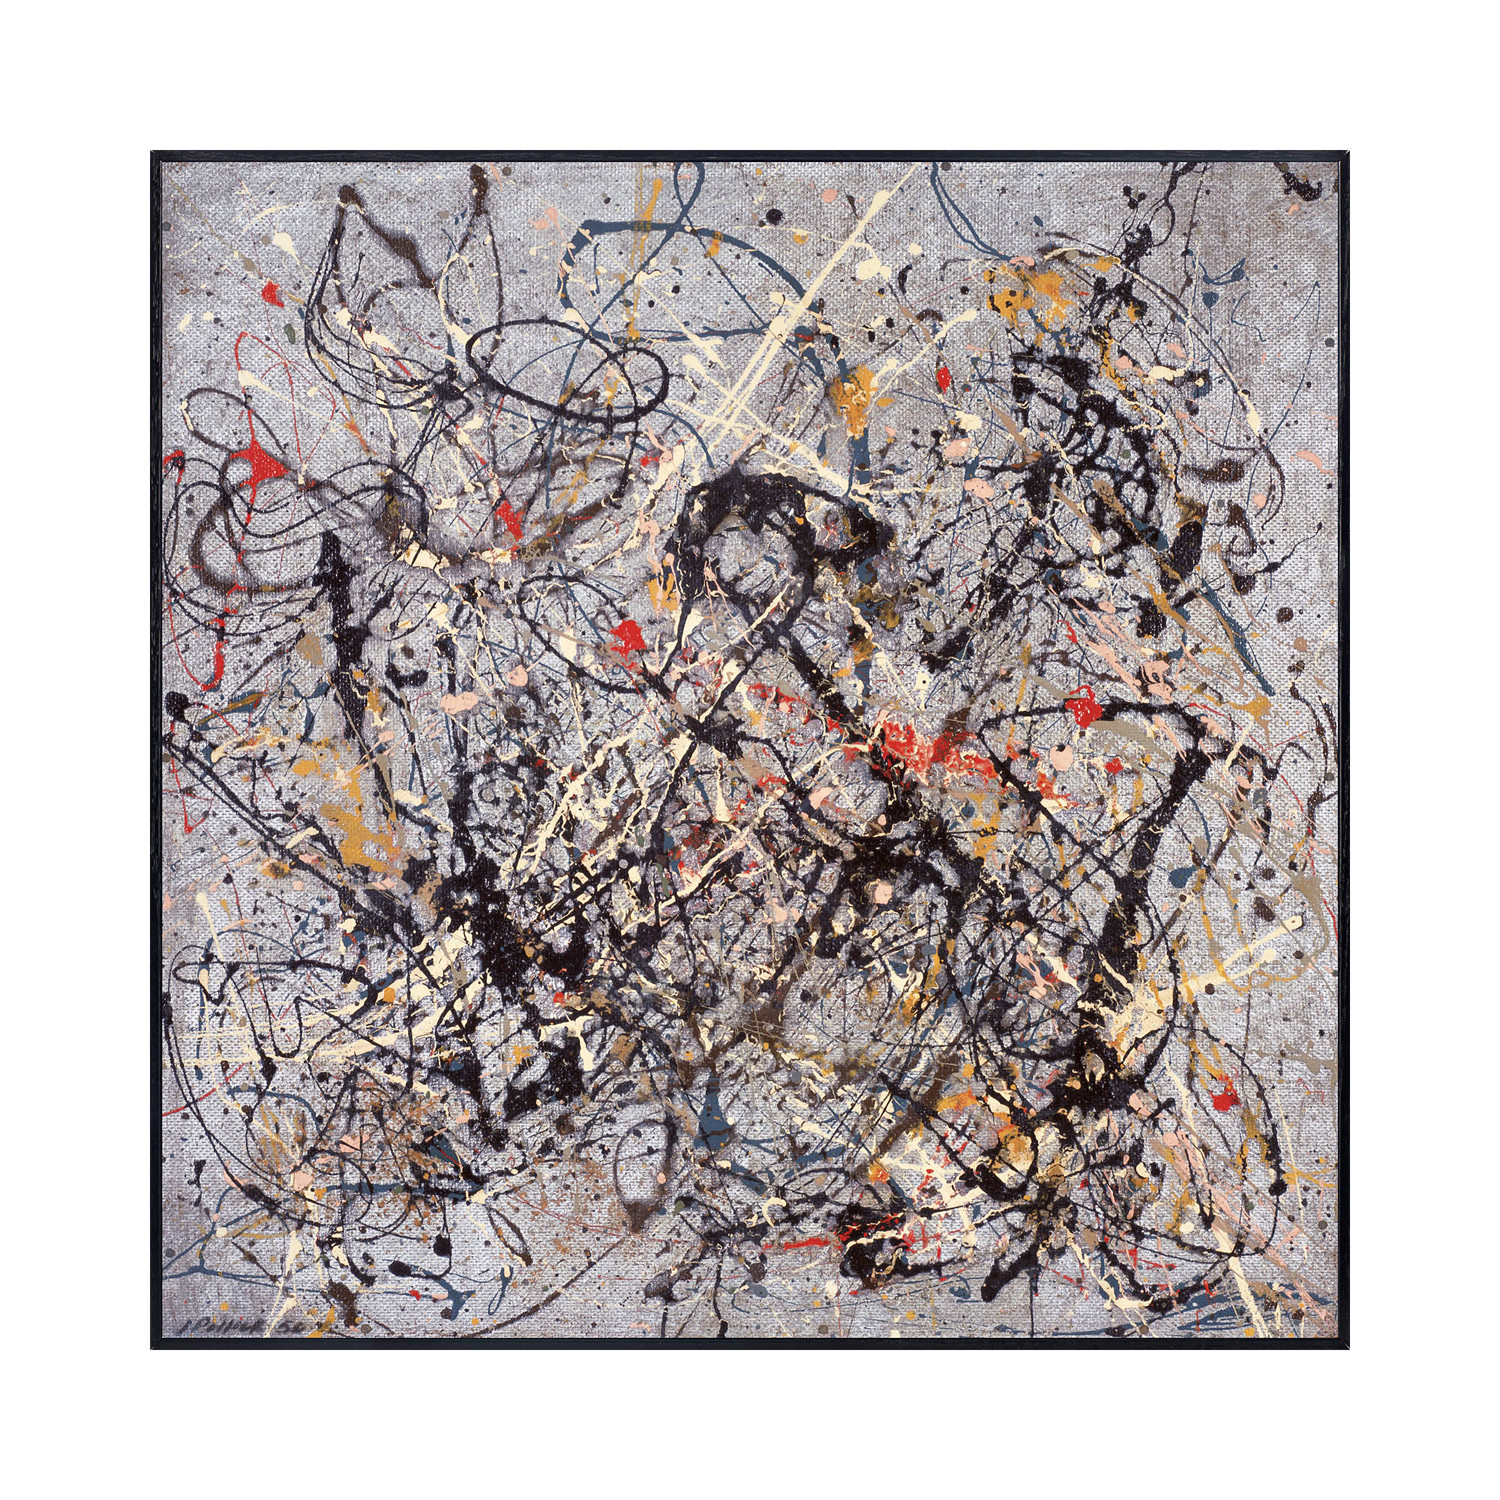 CHOICES of CANVAS 1950 by JACKSON POLLOCK 30W"x30H" NUMBER 18 